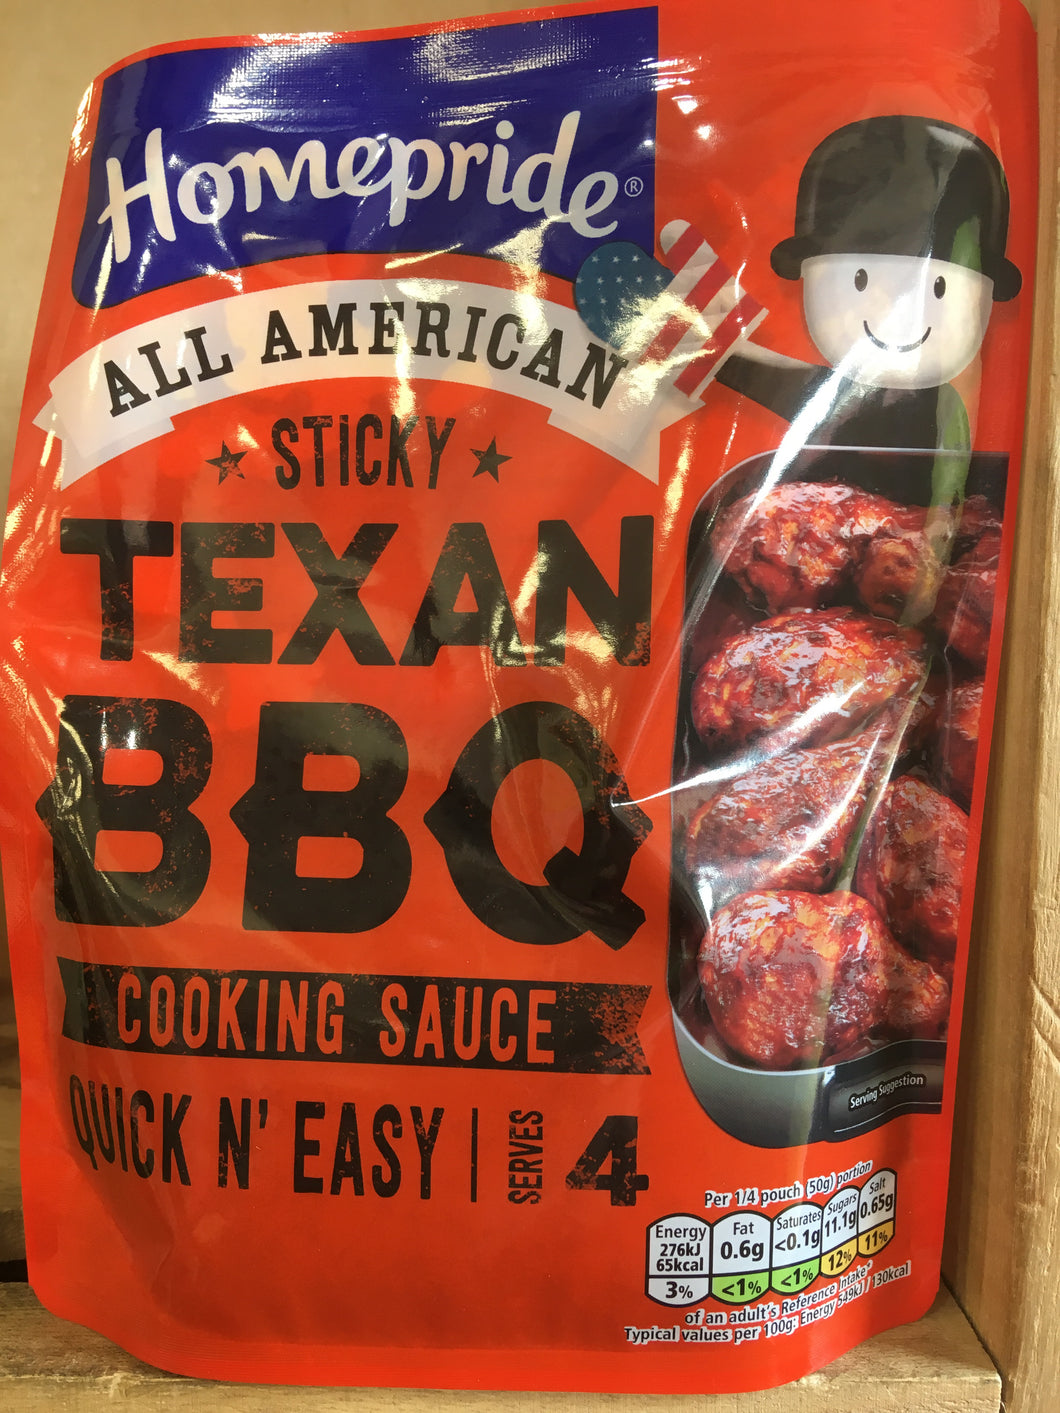 Homepride Sticky Texan BBQ Cooking Sauce 200g